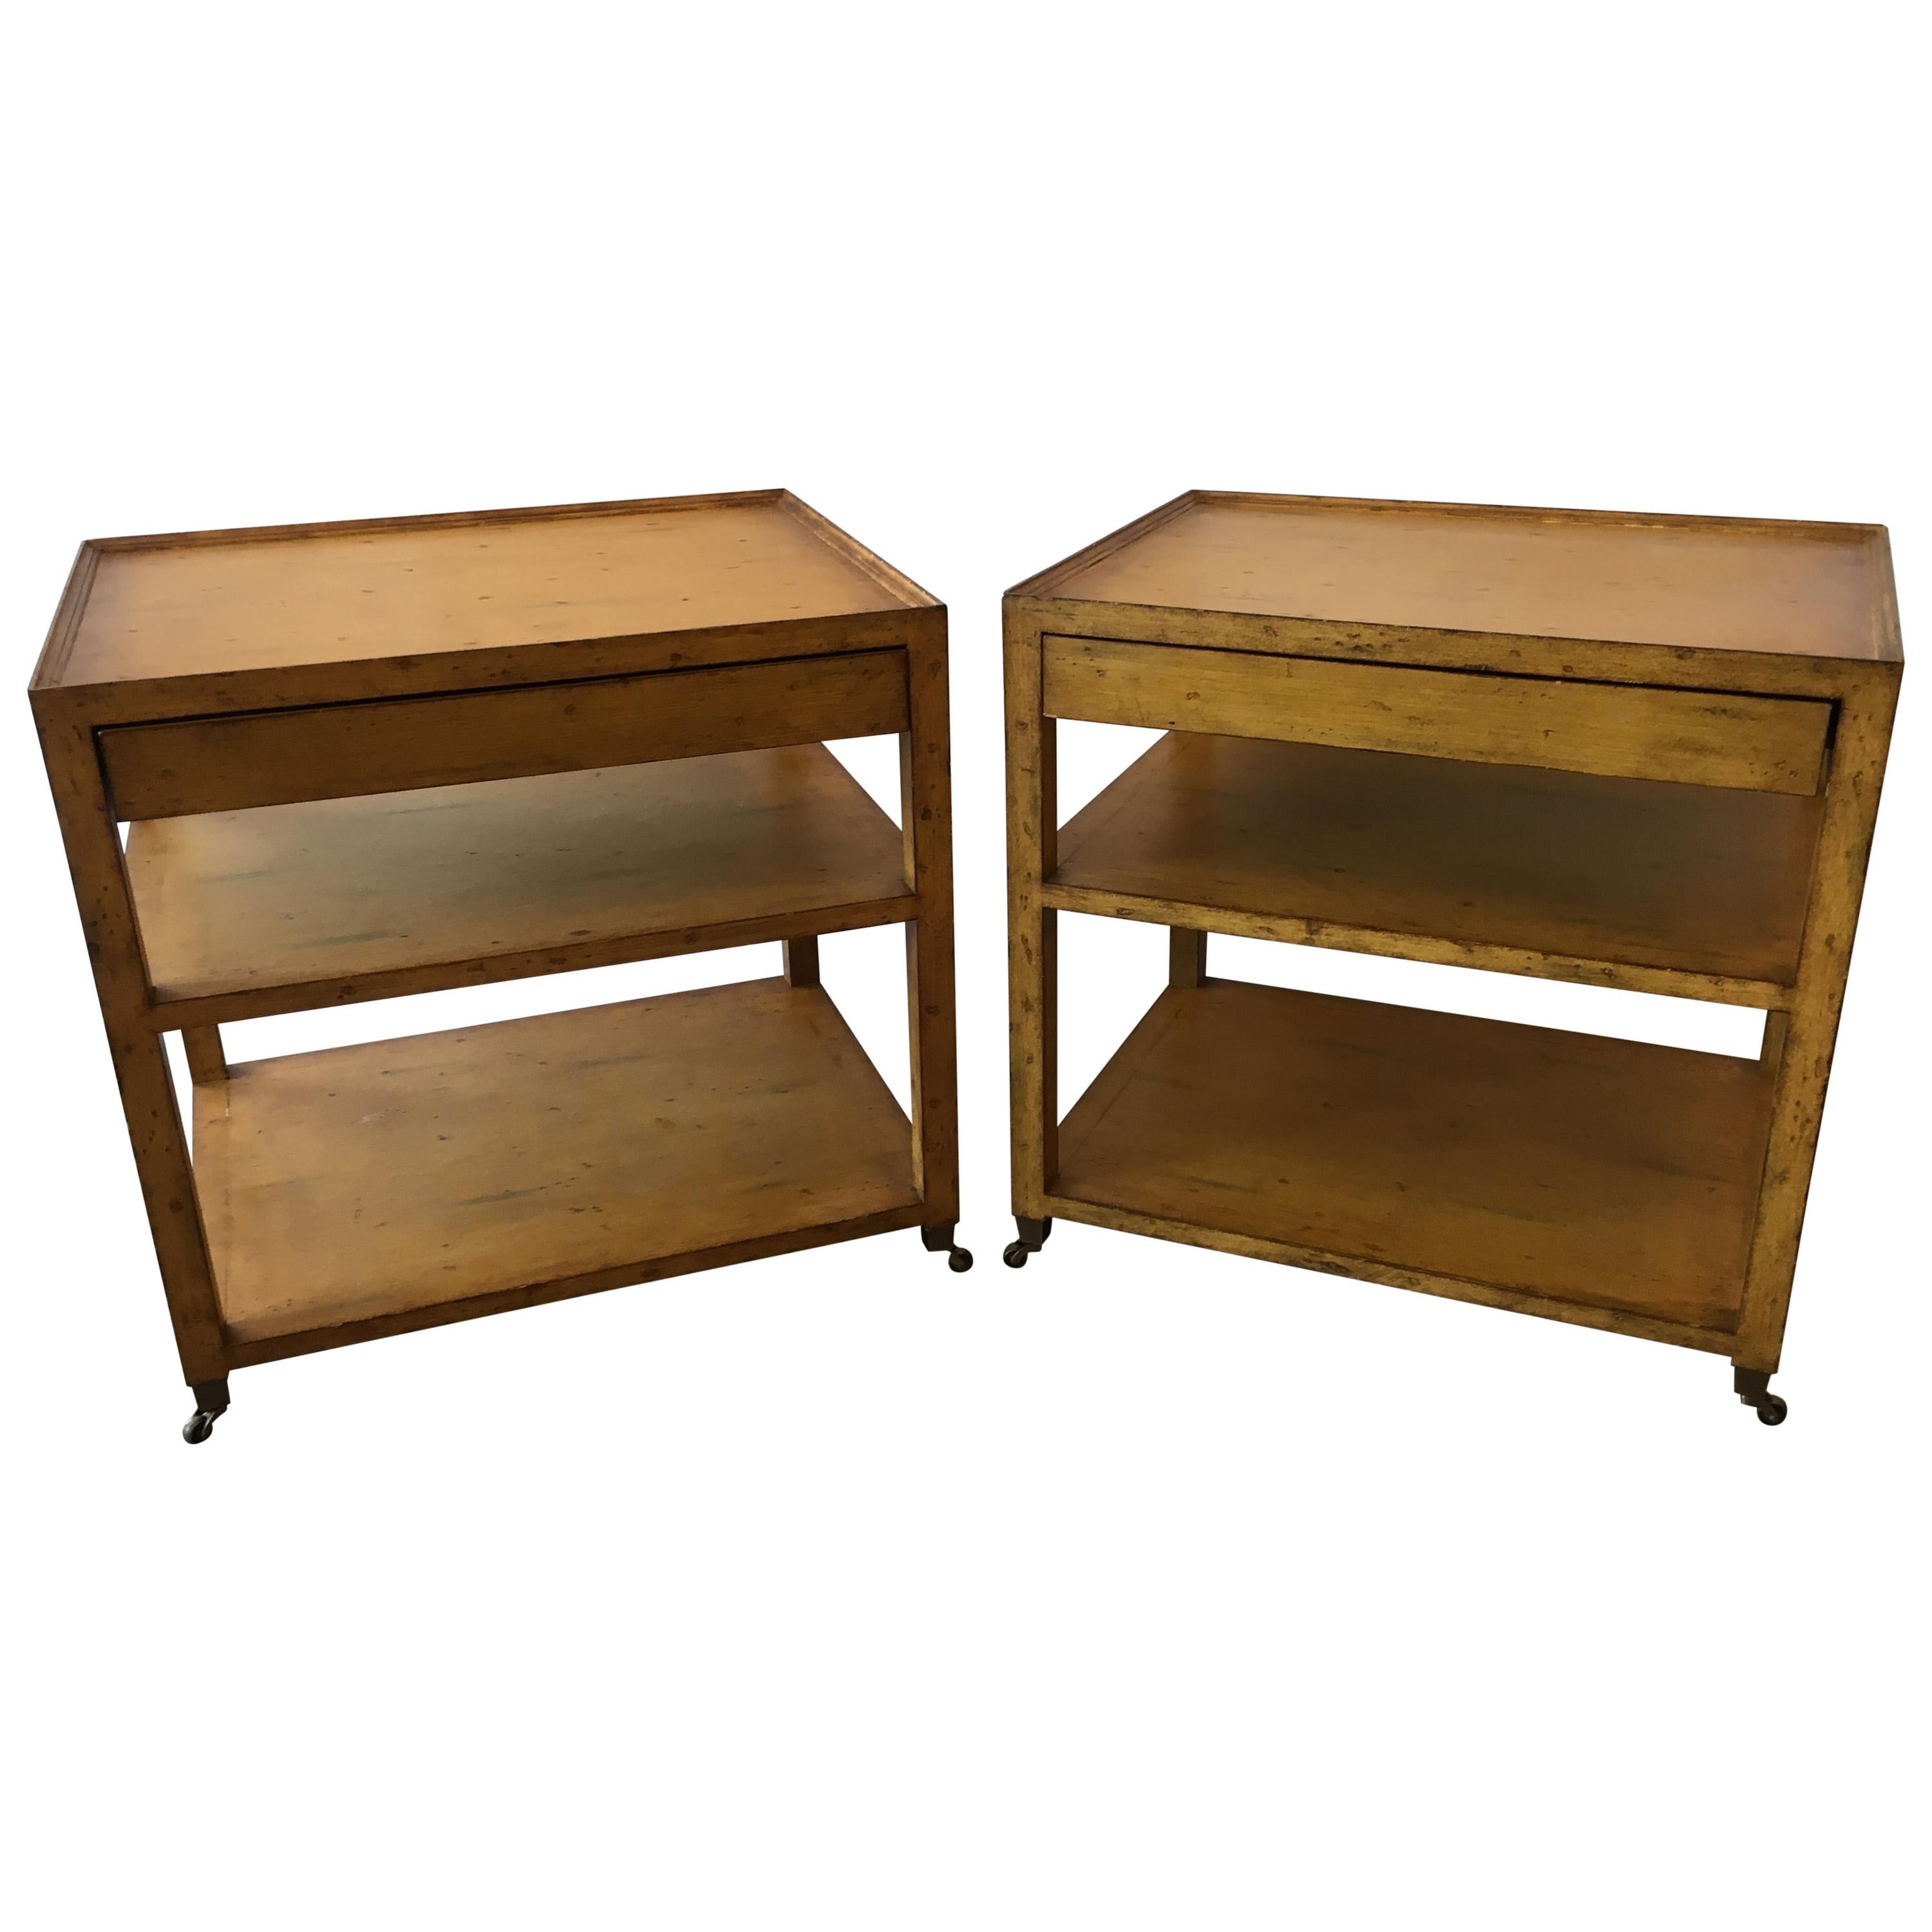 Handsome Pair of Mustard Mahogany Three-Tier Side Tables Nightstands with Drawer